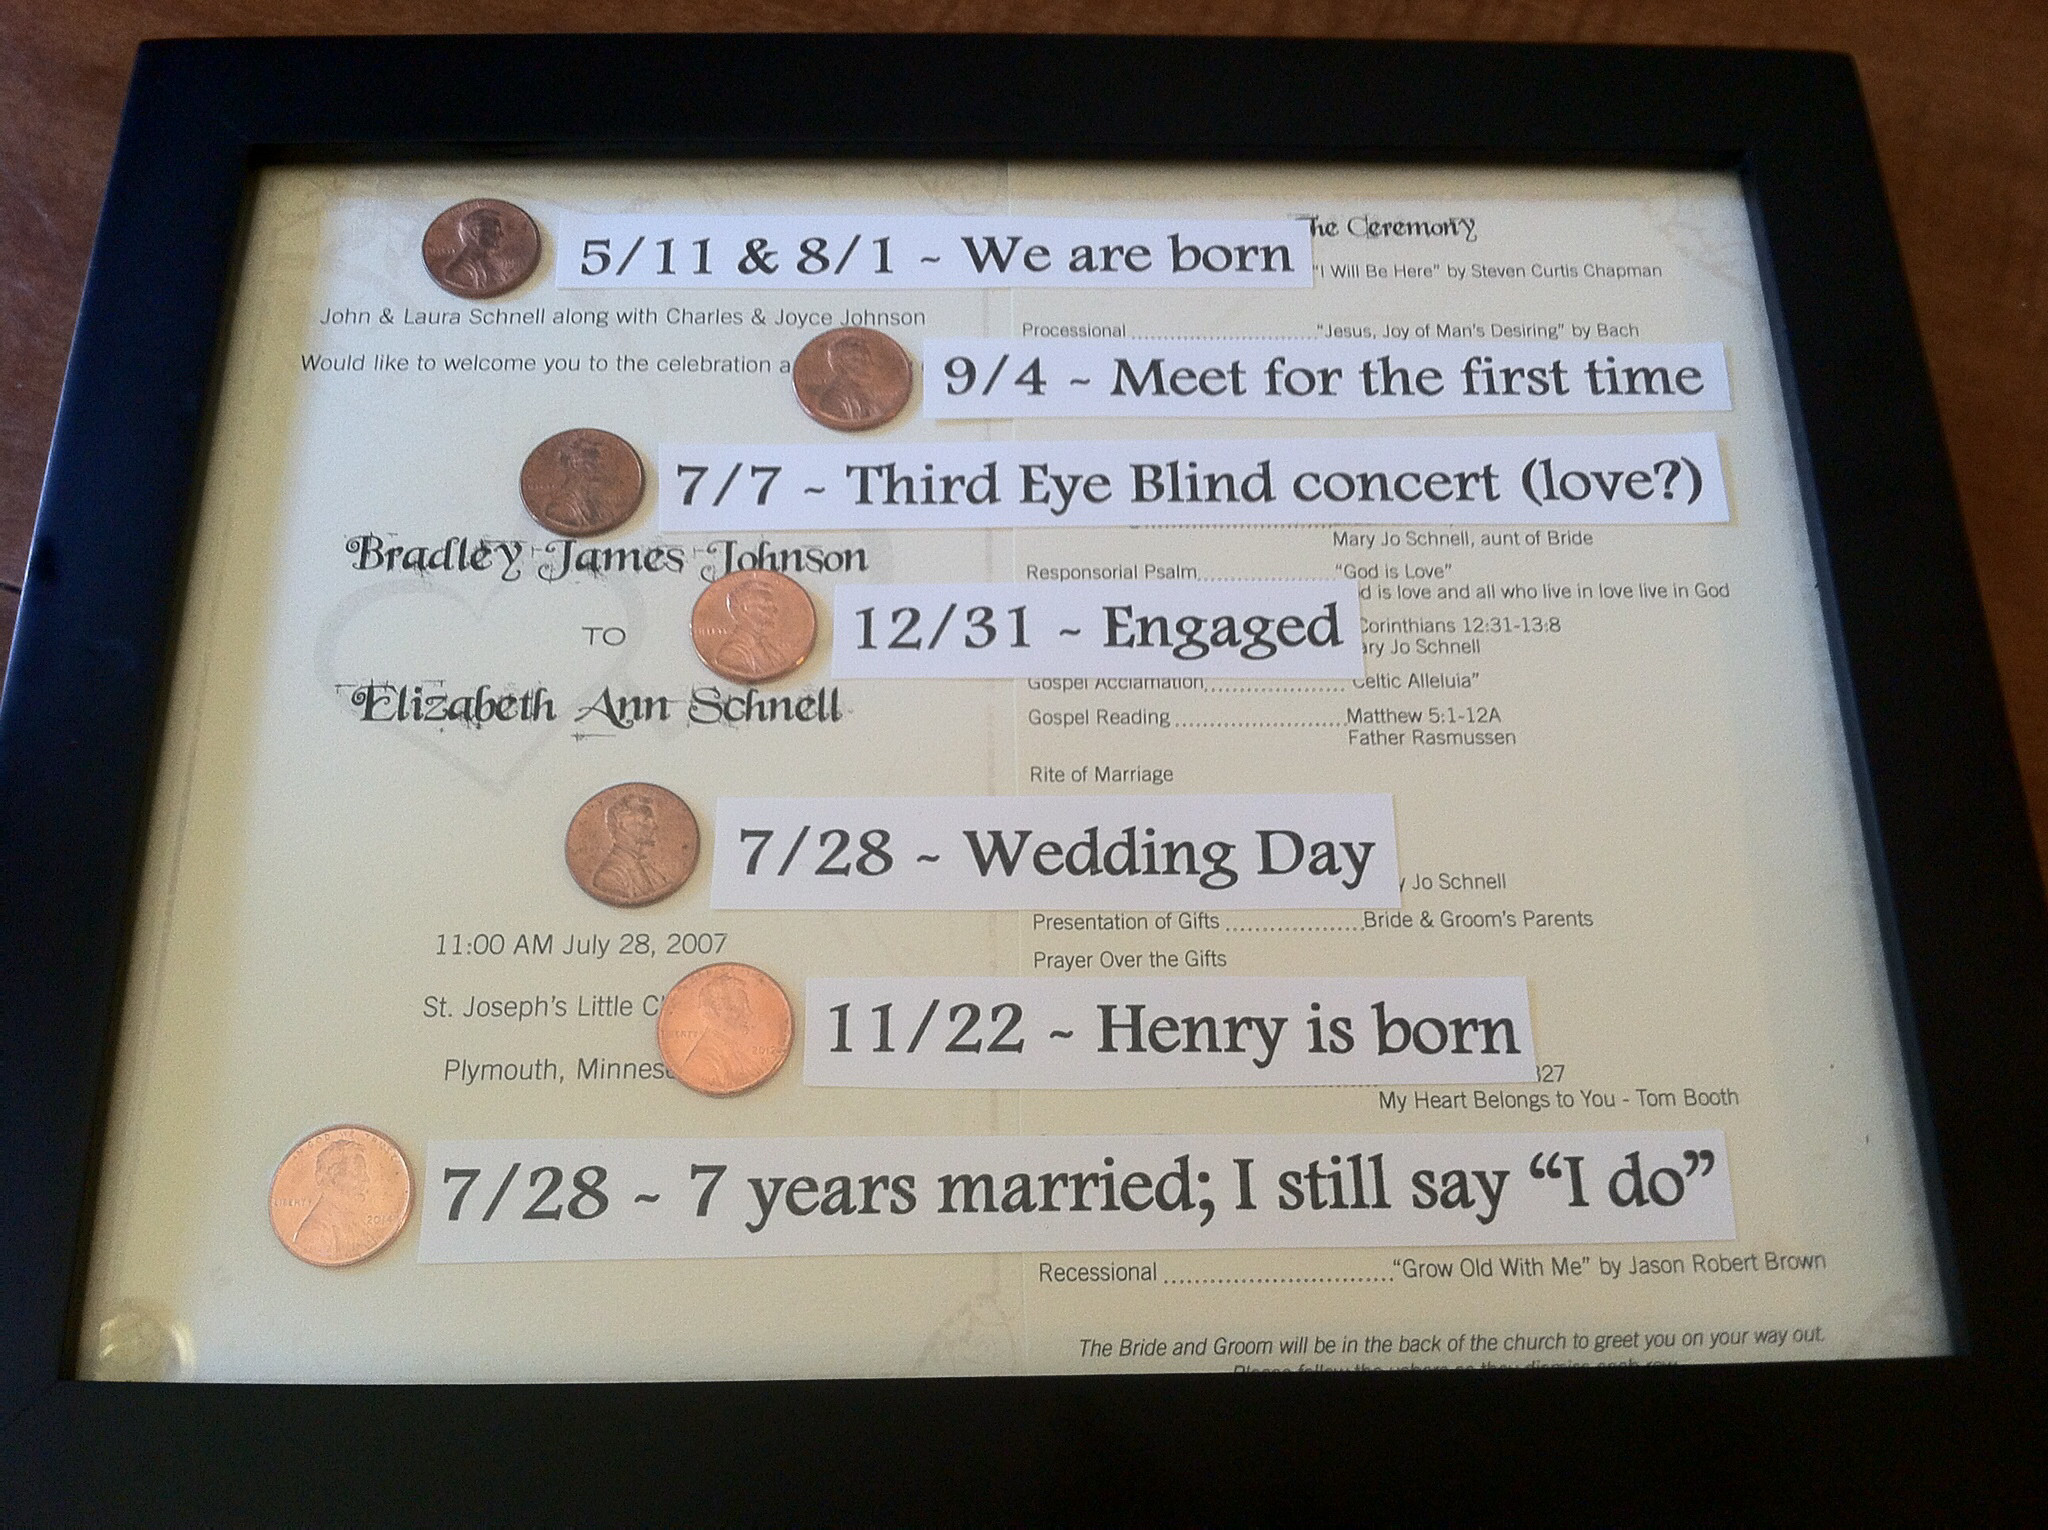 2048x1530 7 year wedding anniversary gift to my husband. 7 years is copper, the  pennies are from the years the events occurred. Paper in background is our  wedding ...